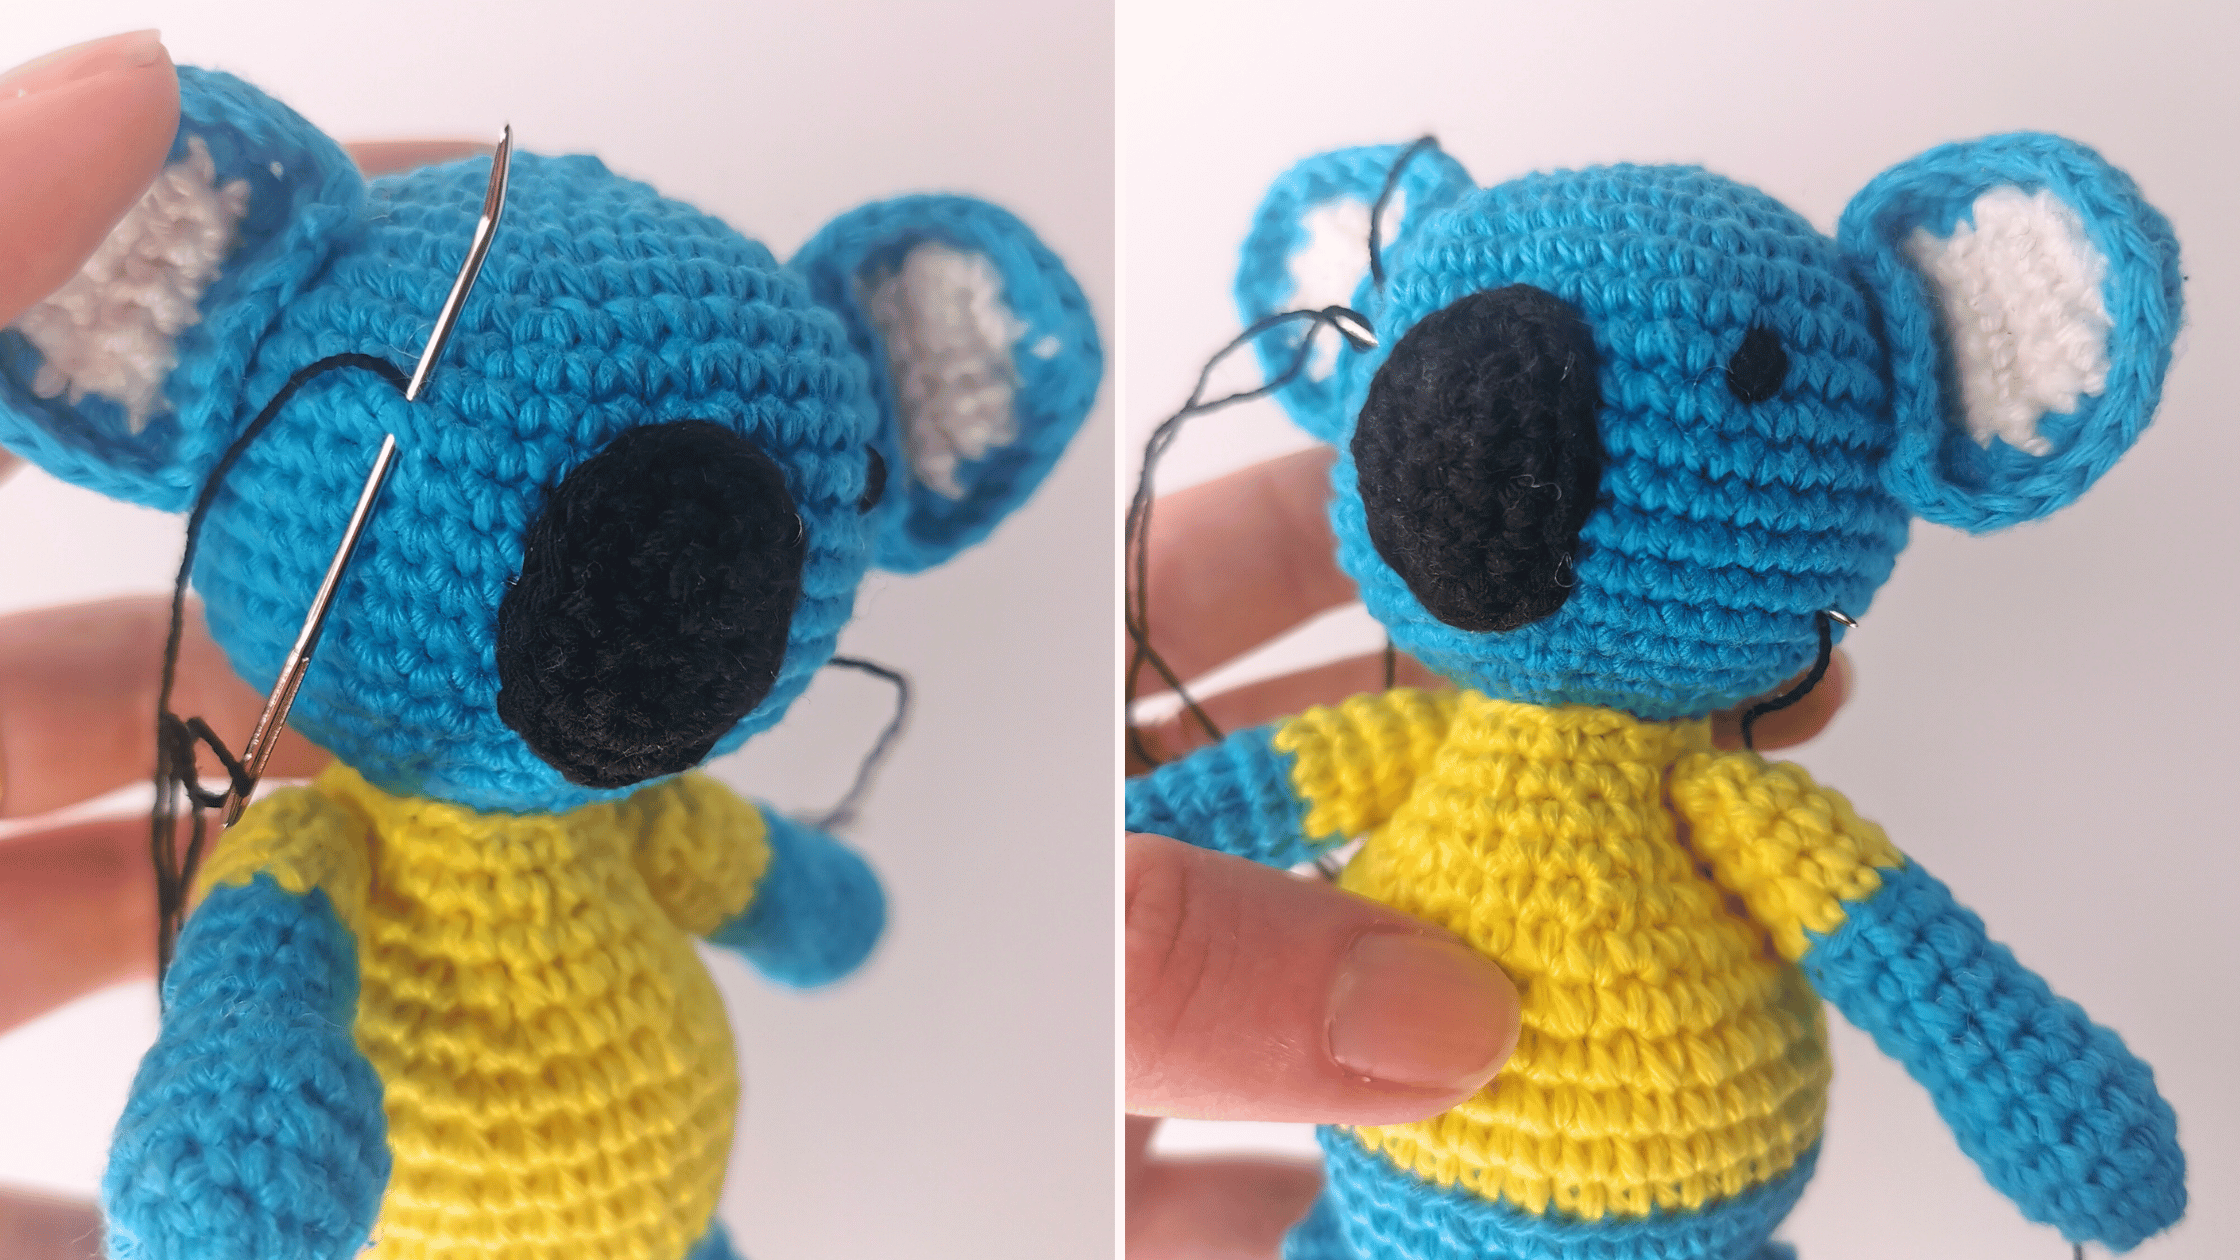 How to Embroider Almost Perfect Amigurumi Eyes – Crochet Arcade